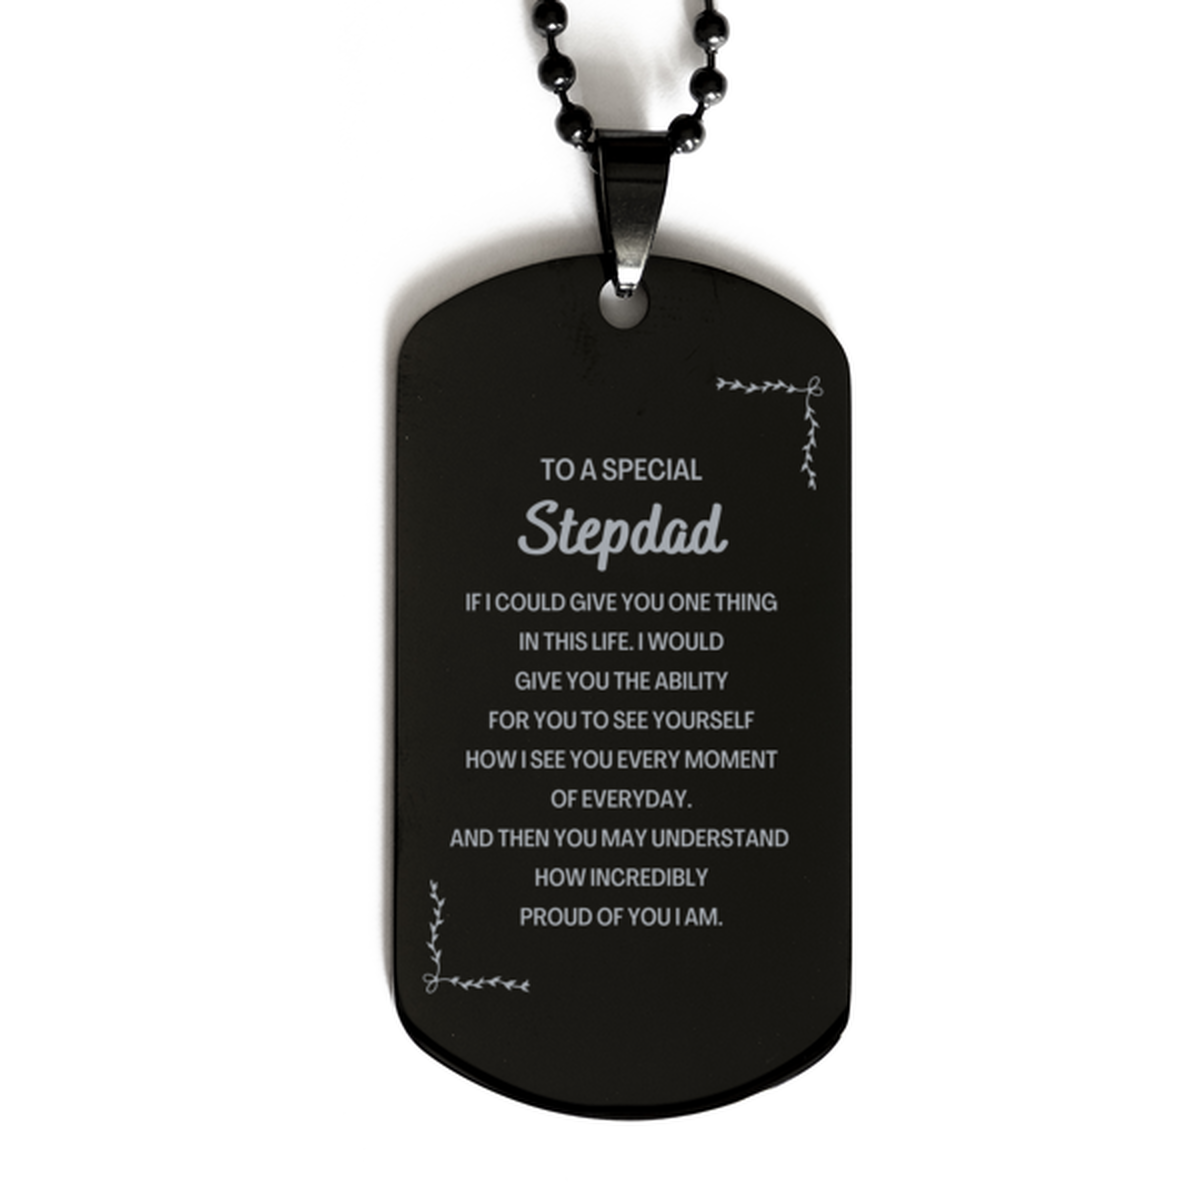 To My Stepdad Black Dog Tag, Gifts For Stepdad Engraved, Inspirational Gifts for Christmas Birthday, Epic Gifts for Stepdad To A Special Stepdad how incredibly proud of you I am